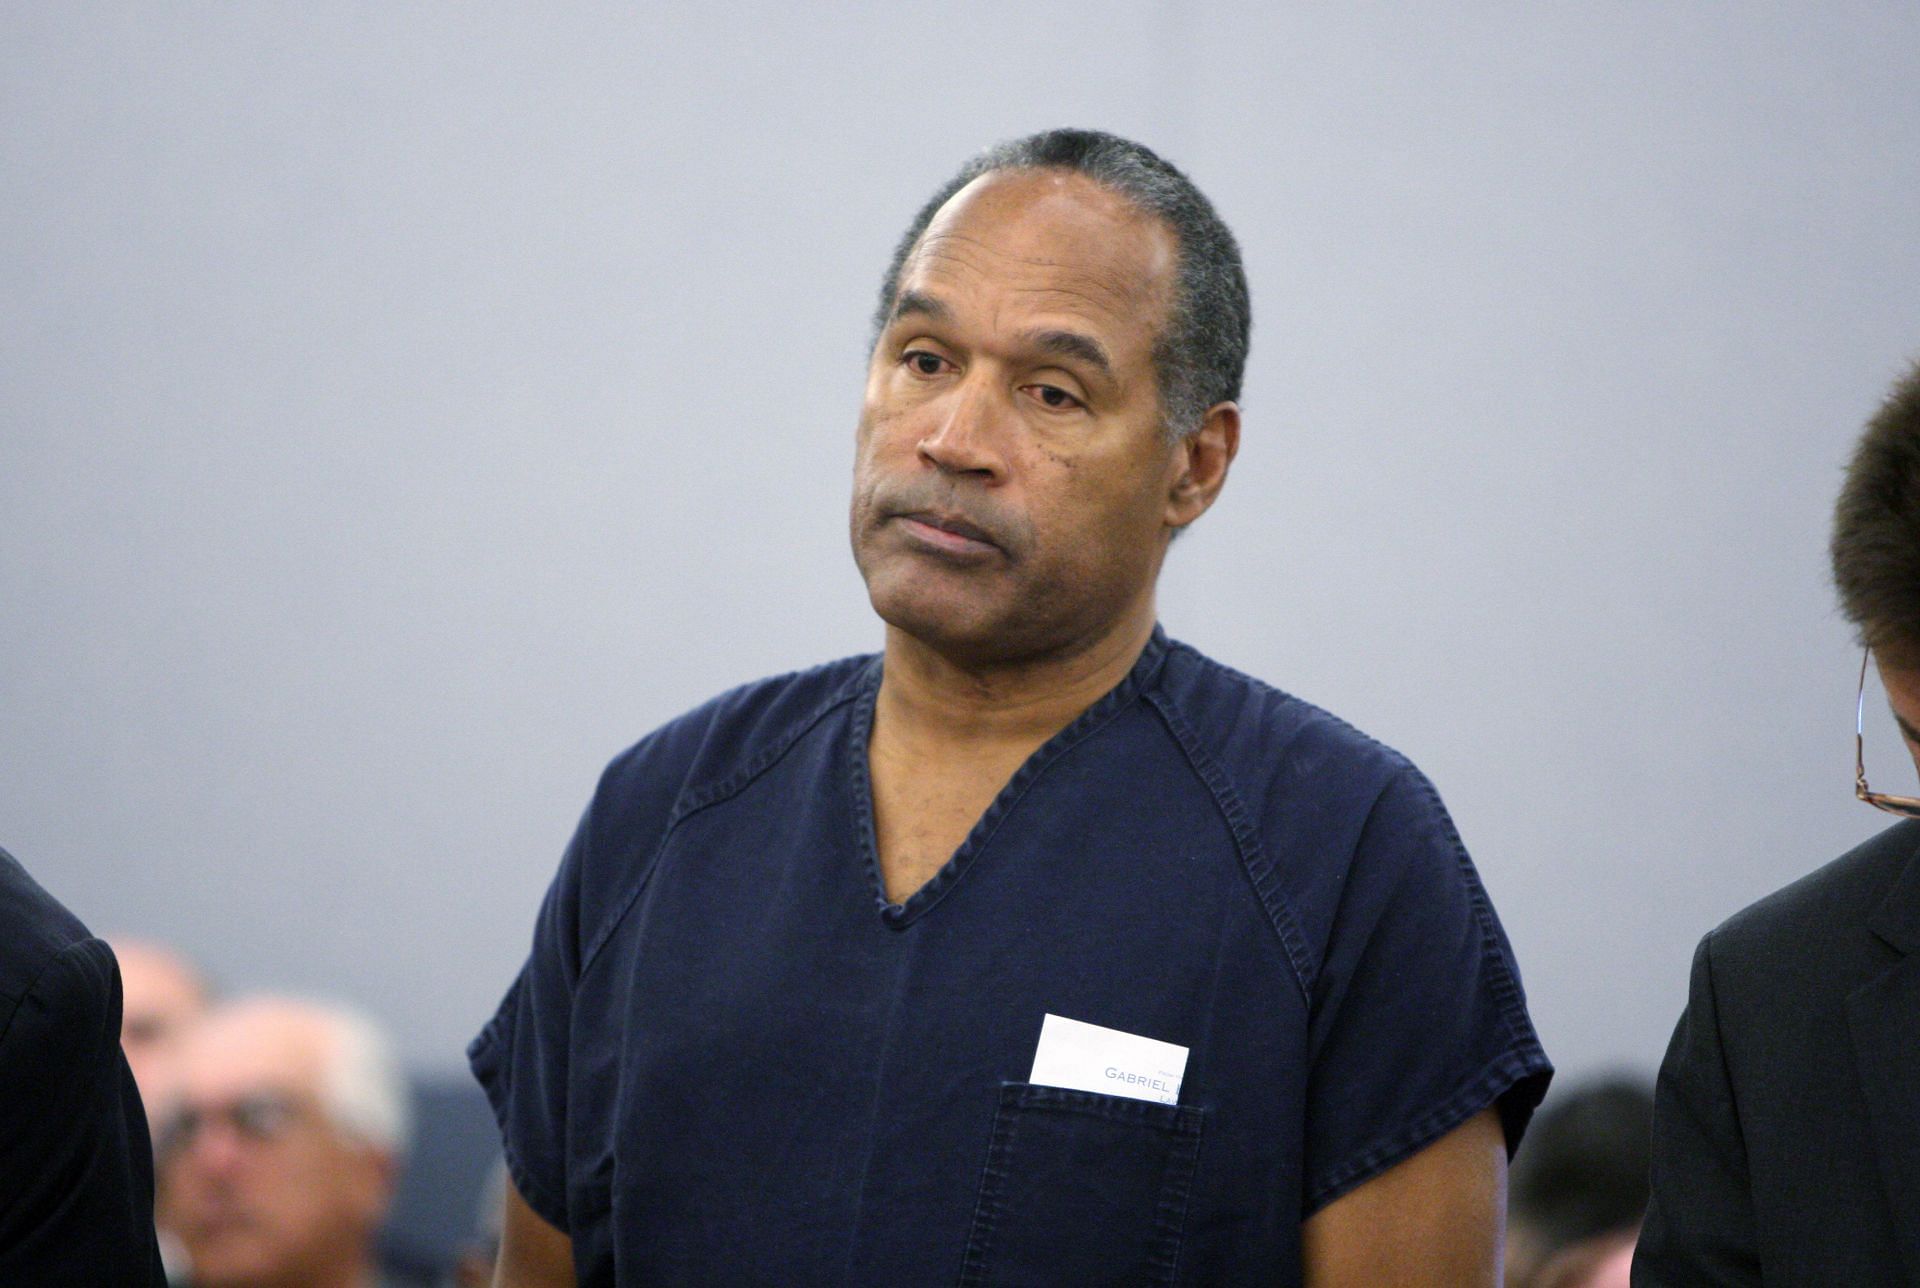 It's telling that most people know O.J. Simpson for his trial rather than his NFL career